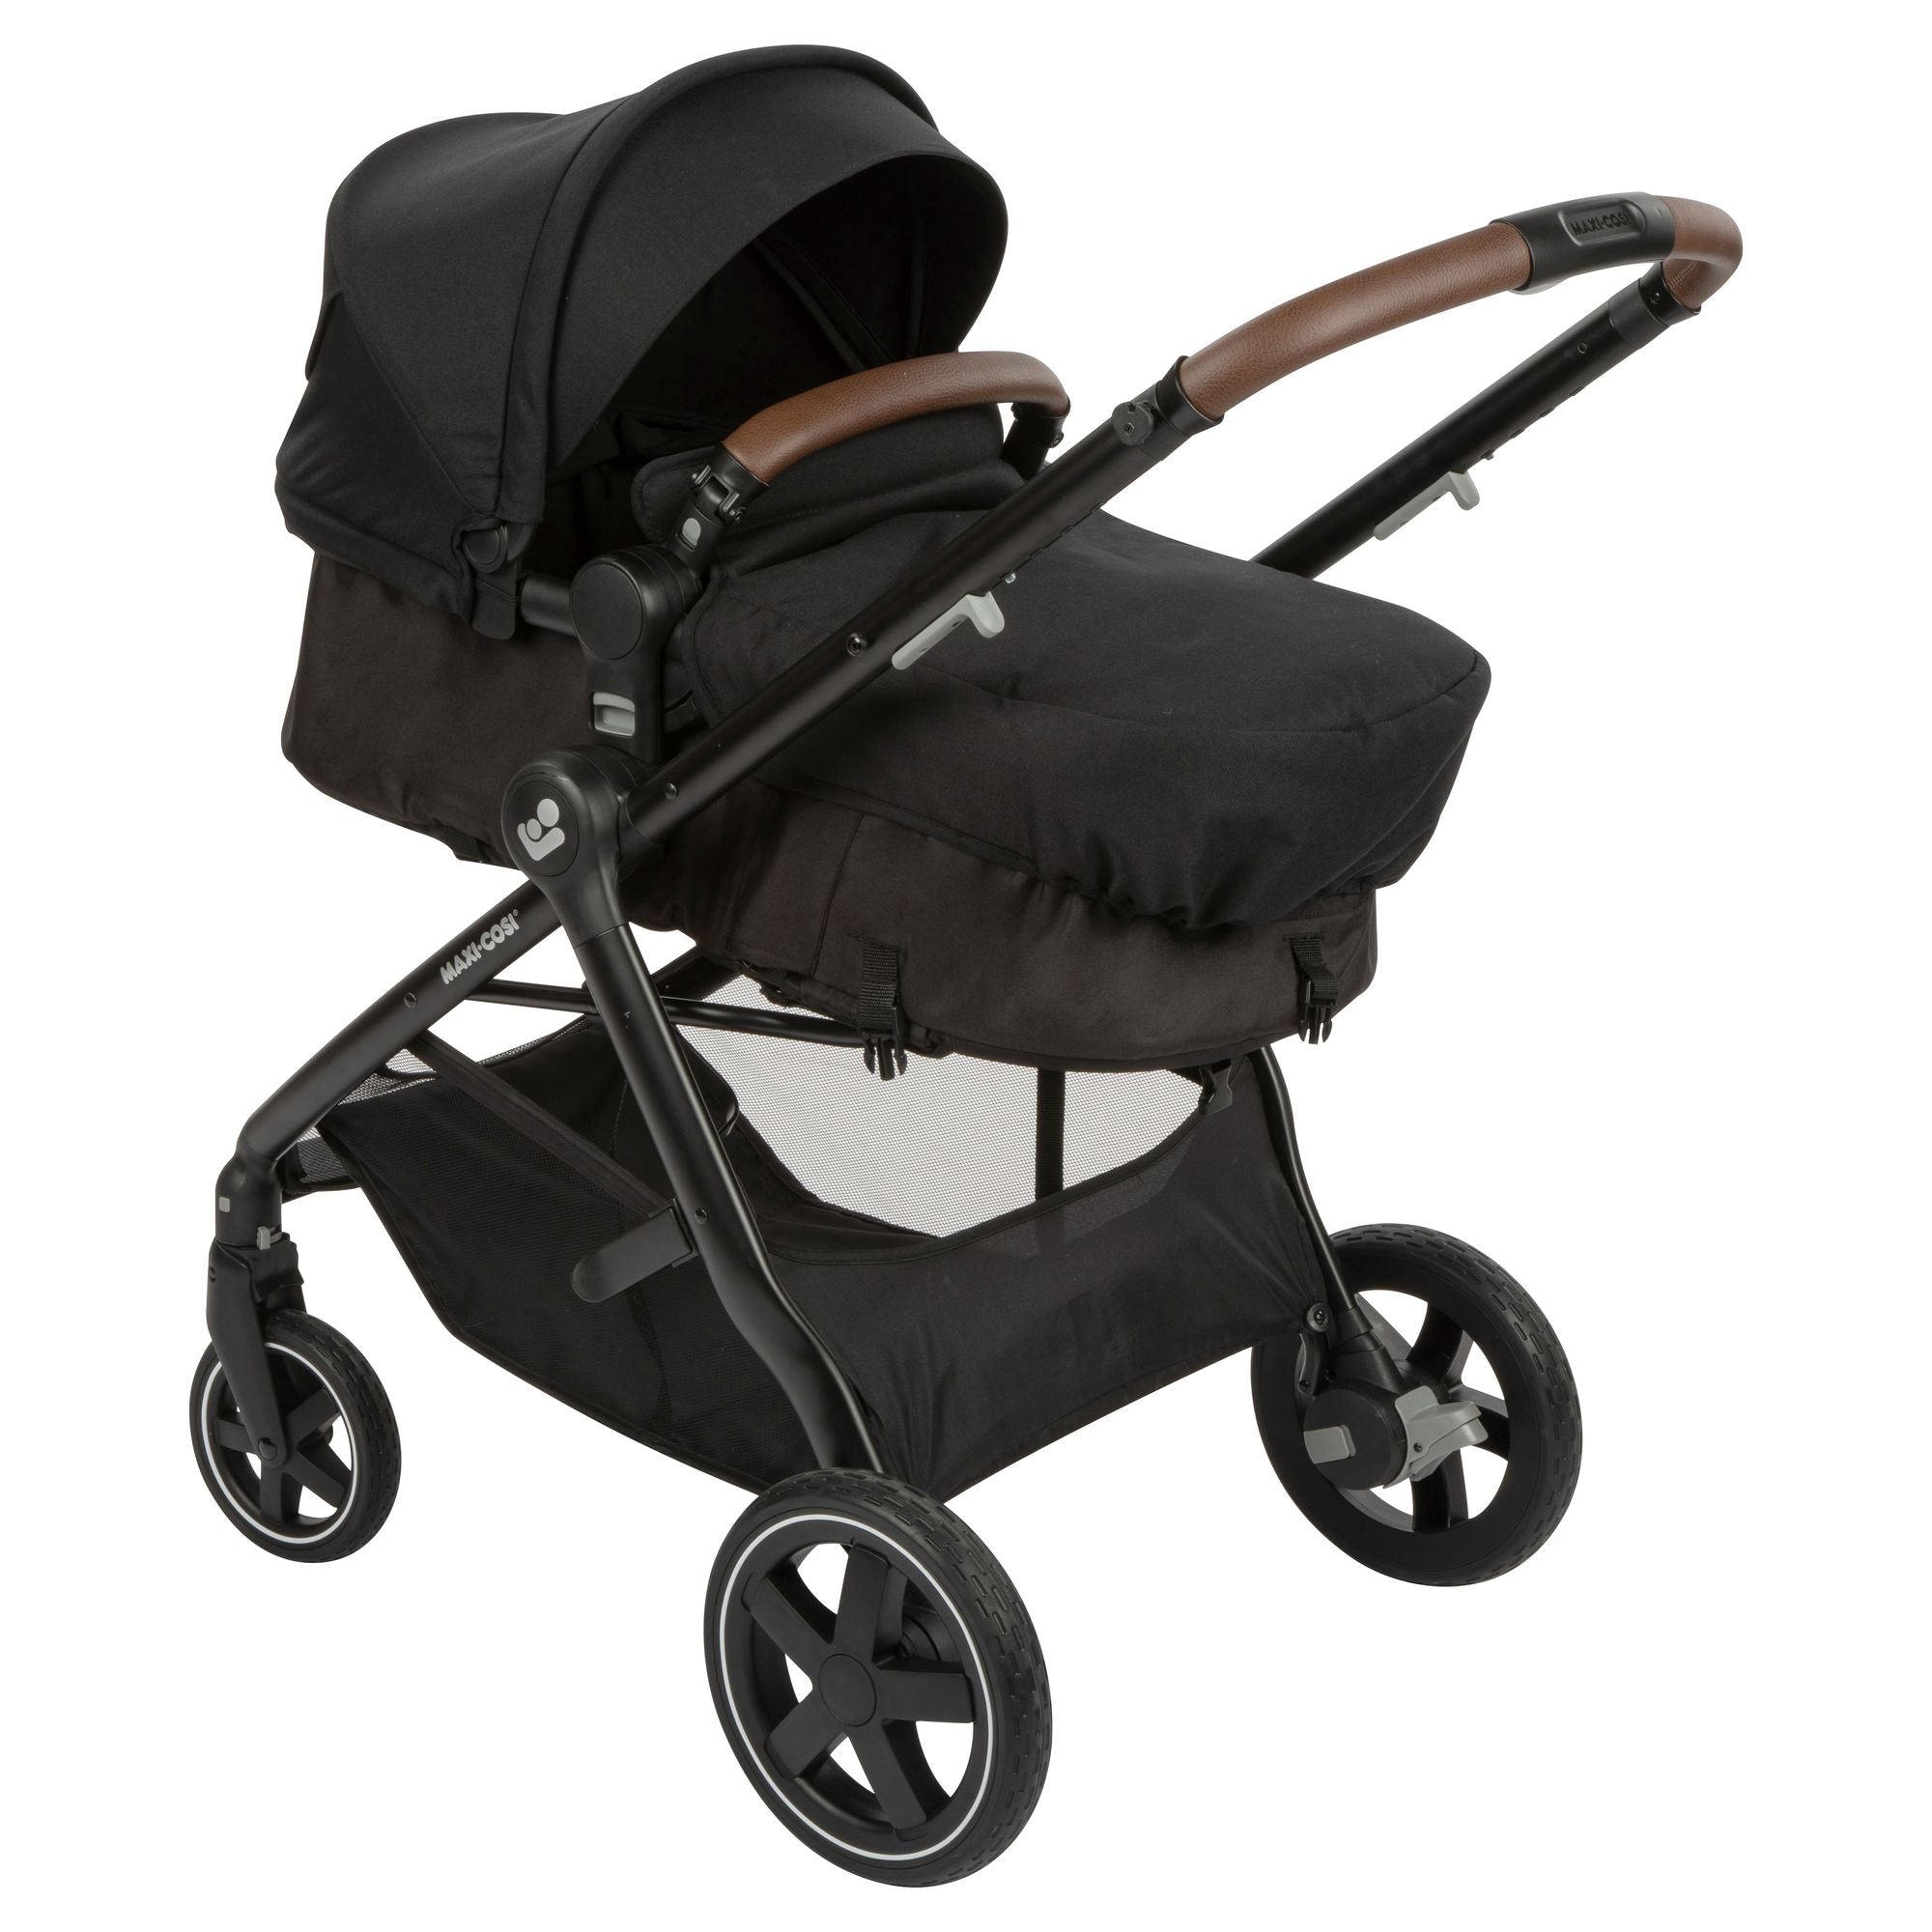 ELITTLE EMU STROLLER parent facing and world facing collection